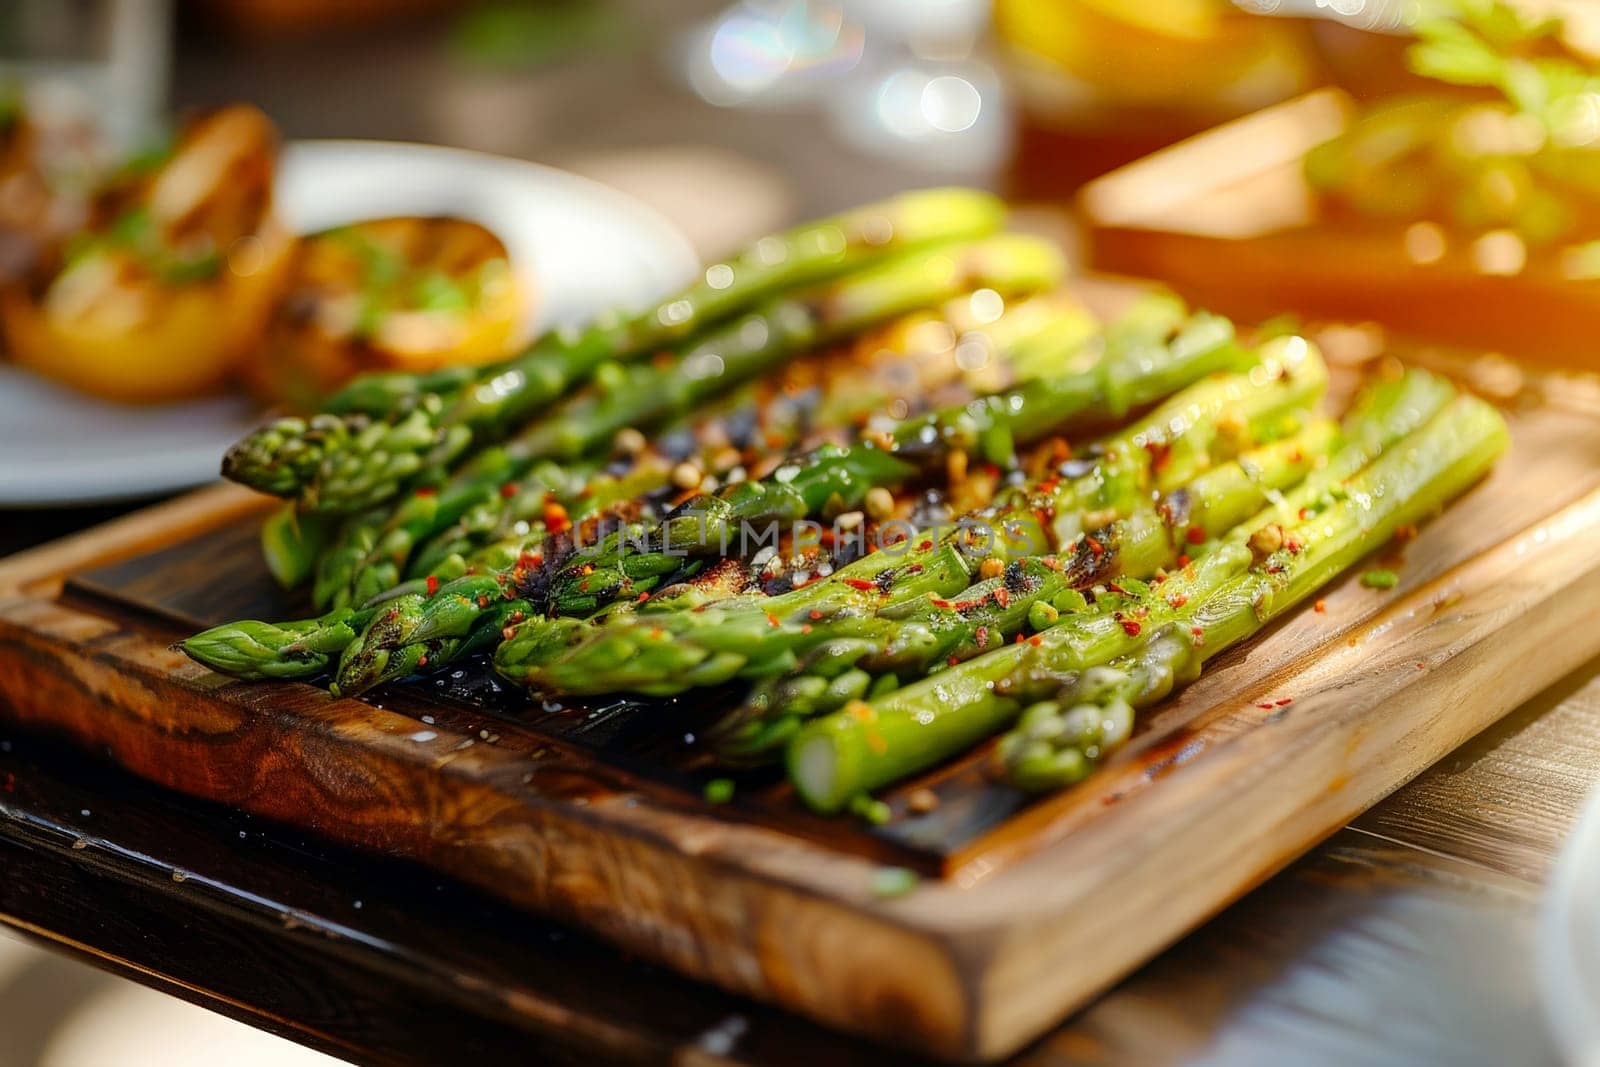 A plate of asparagus is on a wooden cutting board by matamnad